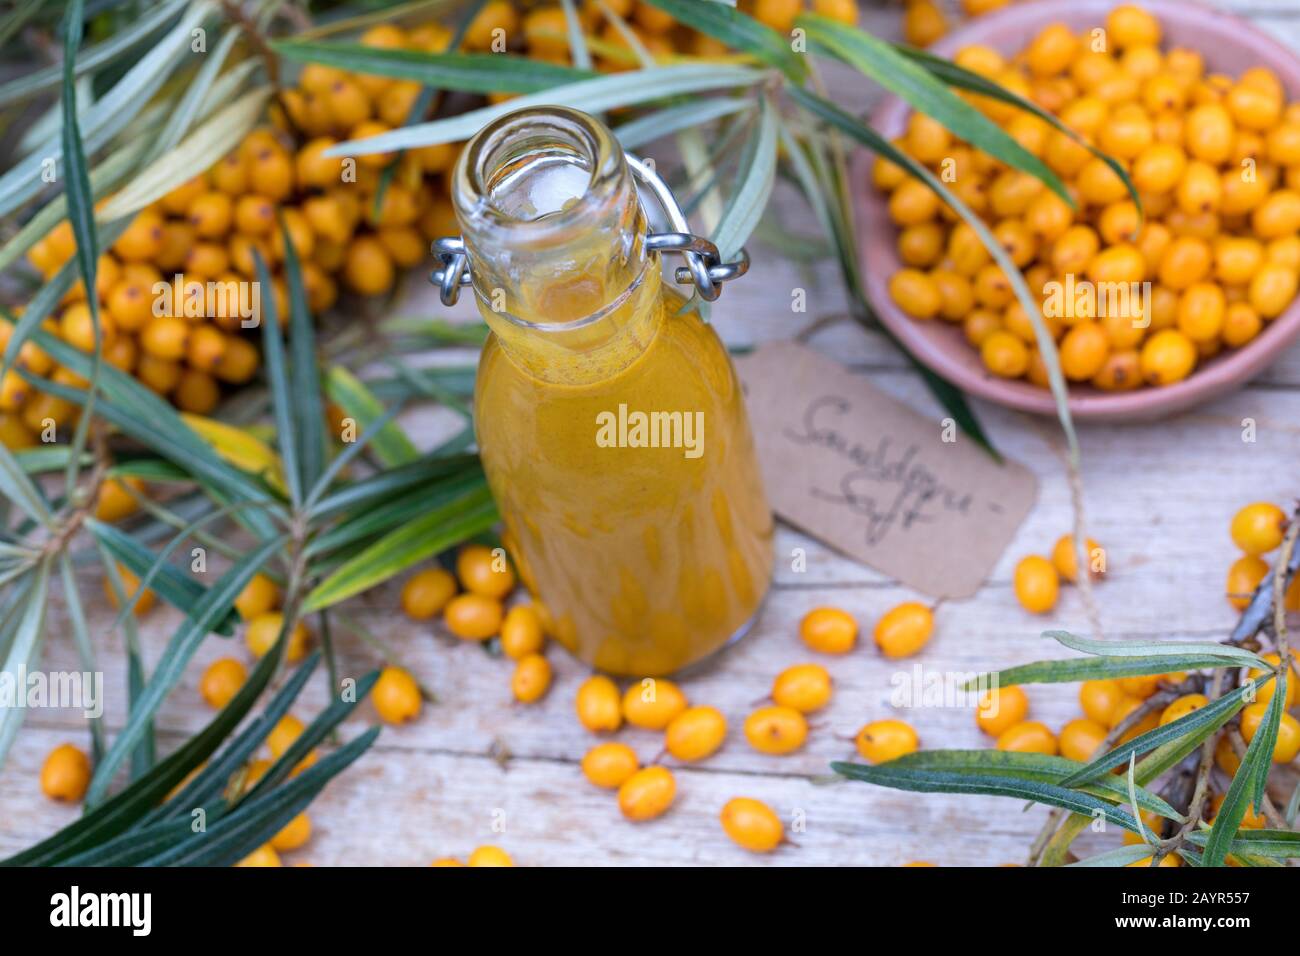 common seabuckthorn (Hippophae rhamnoides), juice made from seabuckthorn berries, Germany Stock Photo